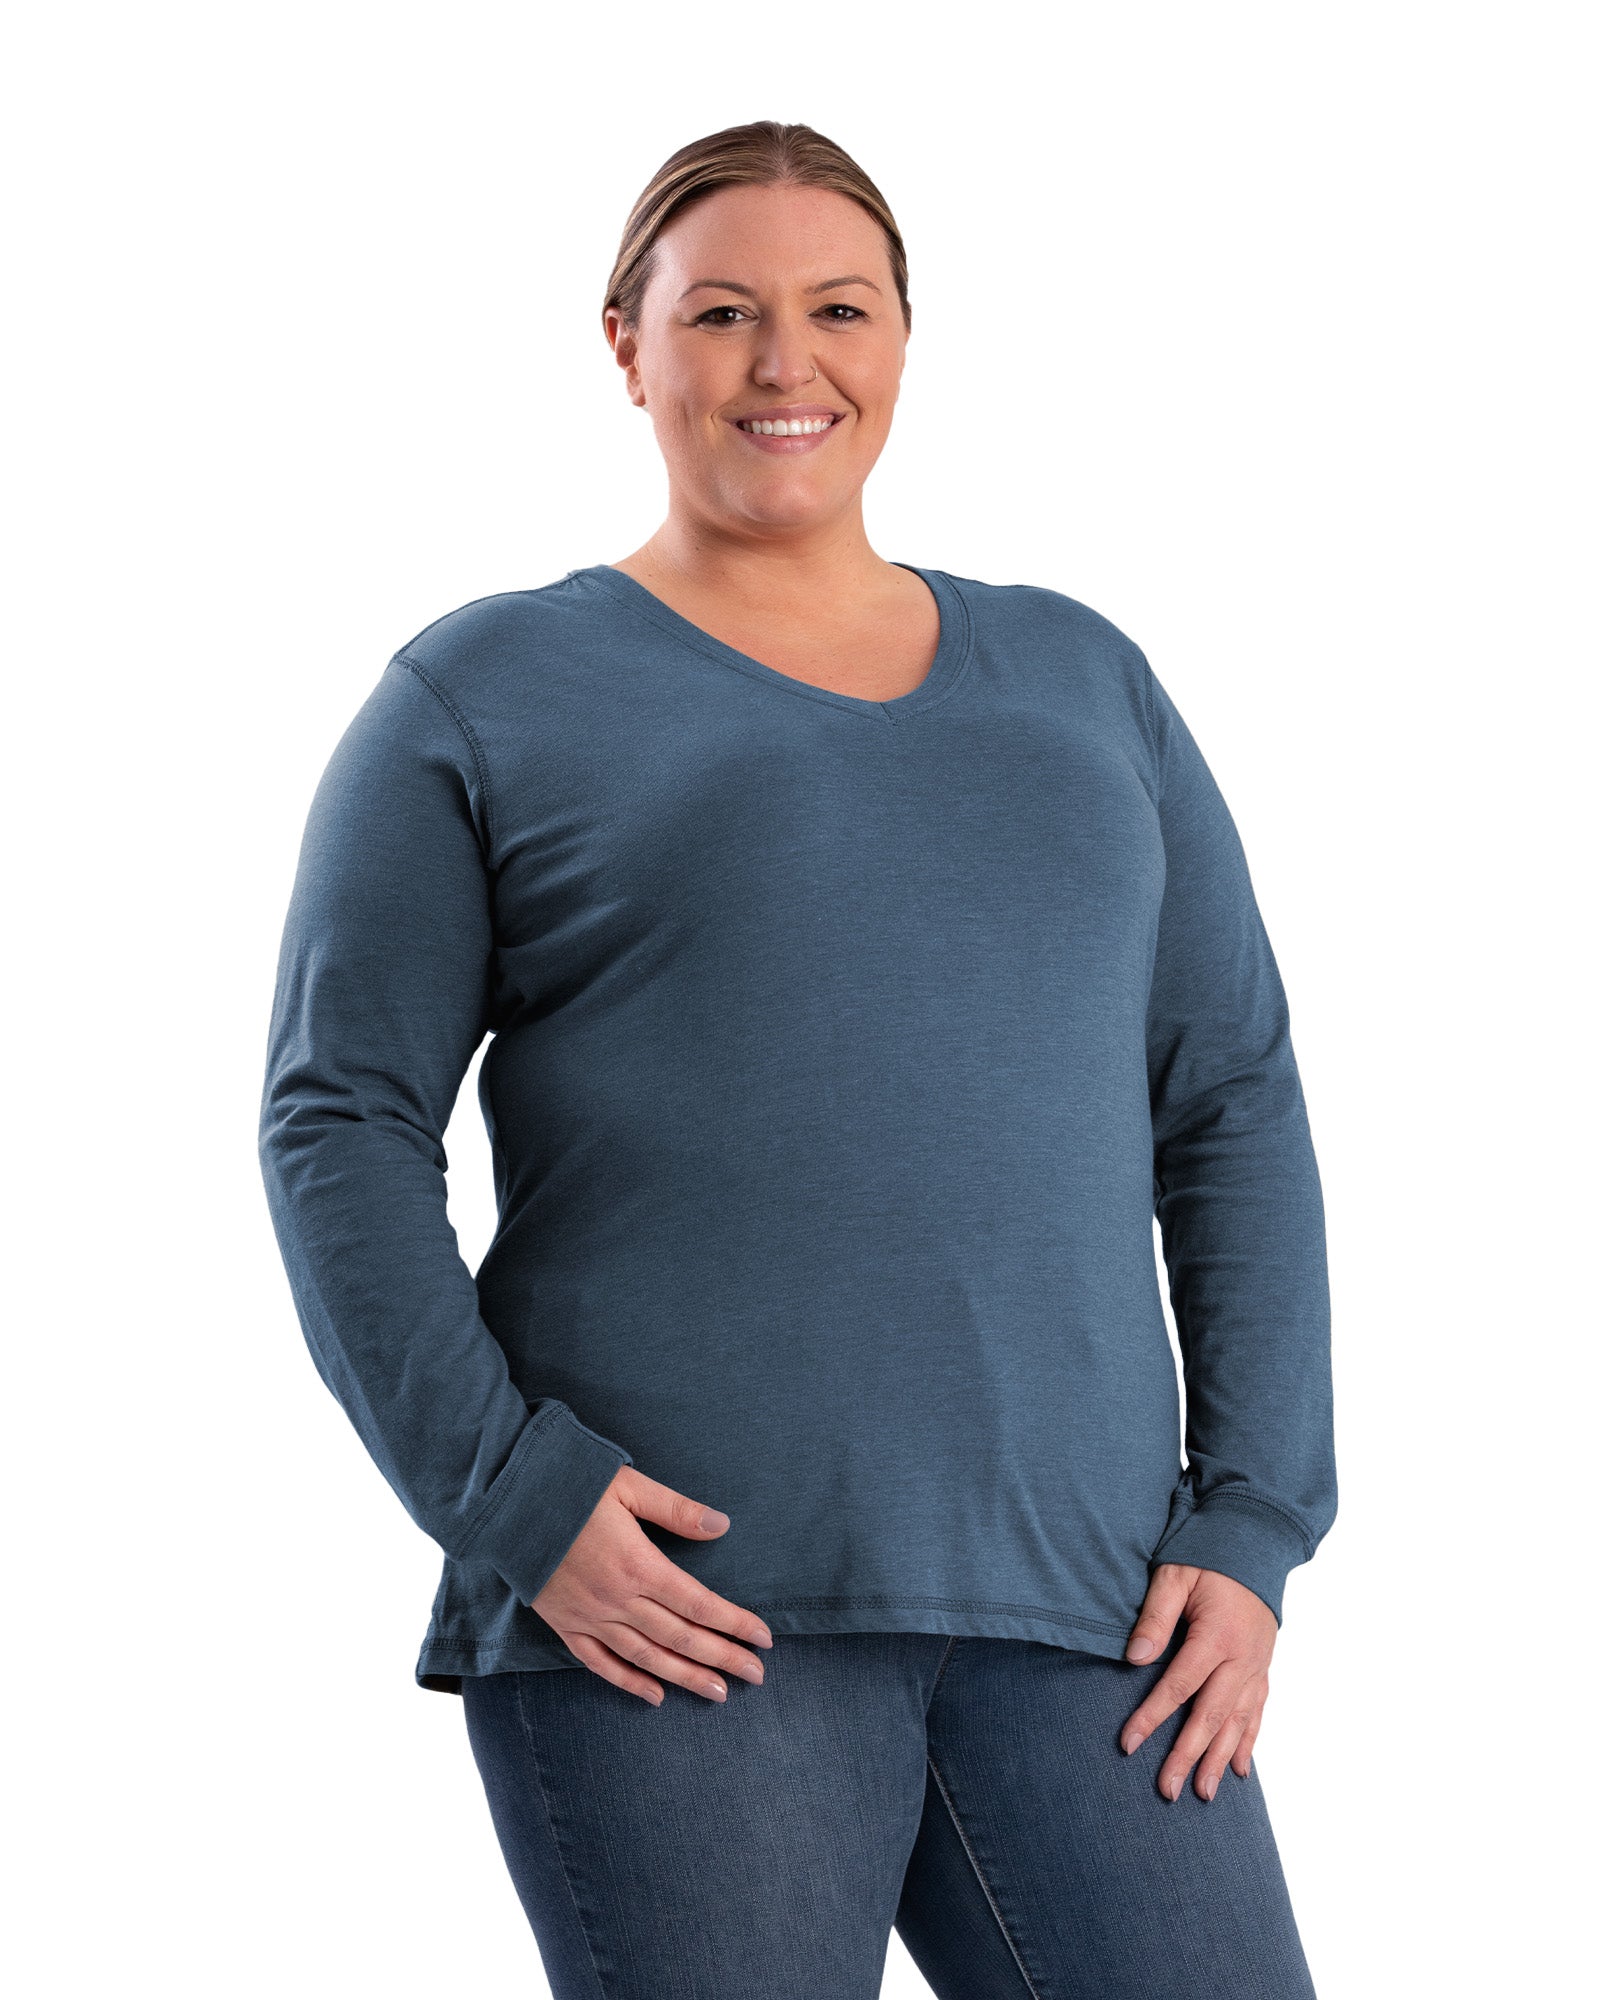 BSW42MDN Women's Performance V-Neck Long Sleeve Tee